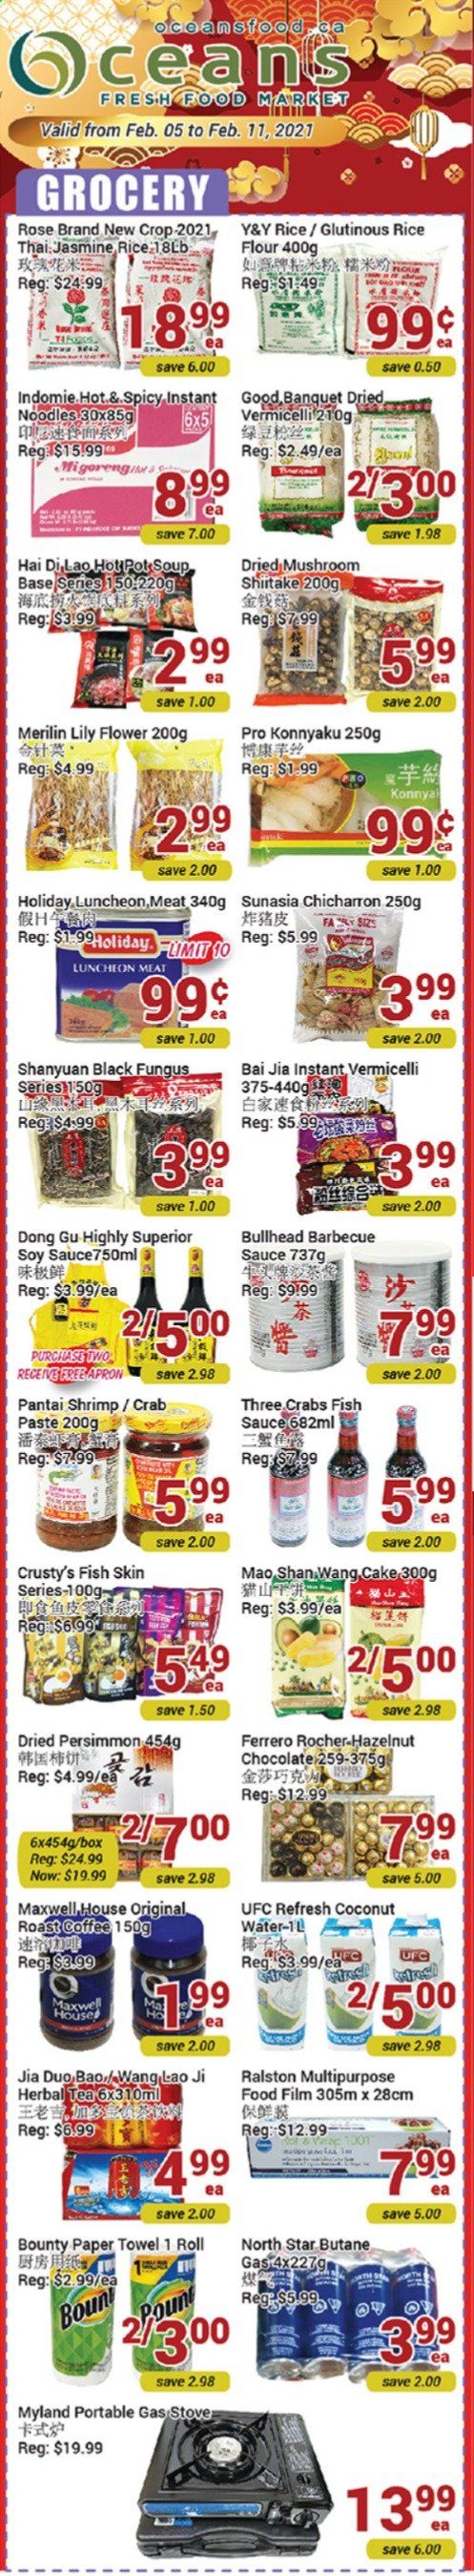 thumbnail - Oceans Flyer - February 05, 2021 - February 11, 2021 - Sales products - mushrooms, cake, persimmons, crab, fish, shrimps, soup, instant noodles, sauce, noodles, lunch meat, chocolate, Bounty, flour, rice flour, jasmine rice, BBQ sauce, fish sauce, coconut water, Bai, Maxwell House, tea, herbal tea, coffee, rosé wine, paper towels. Page 1.